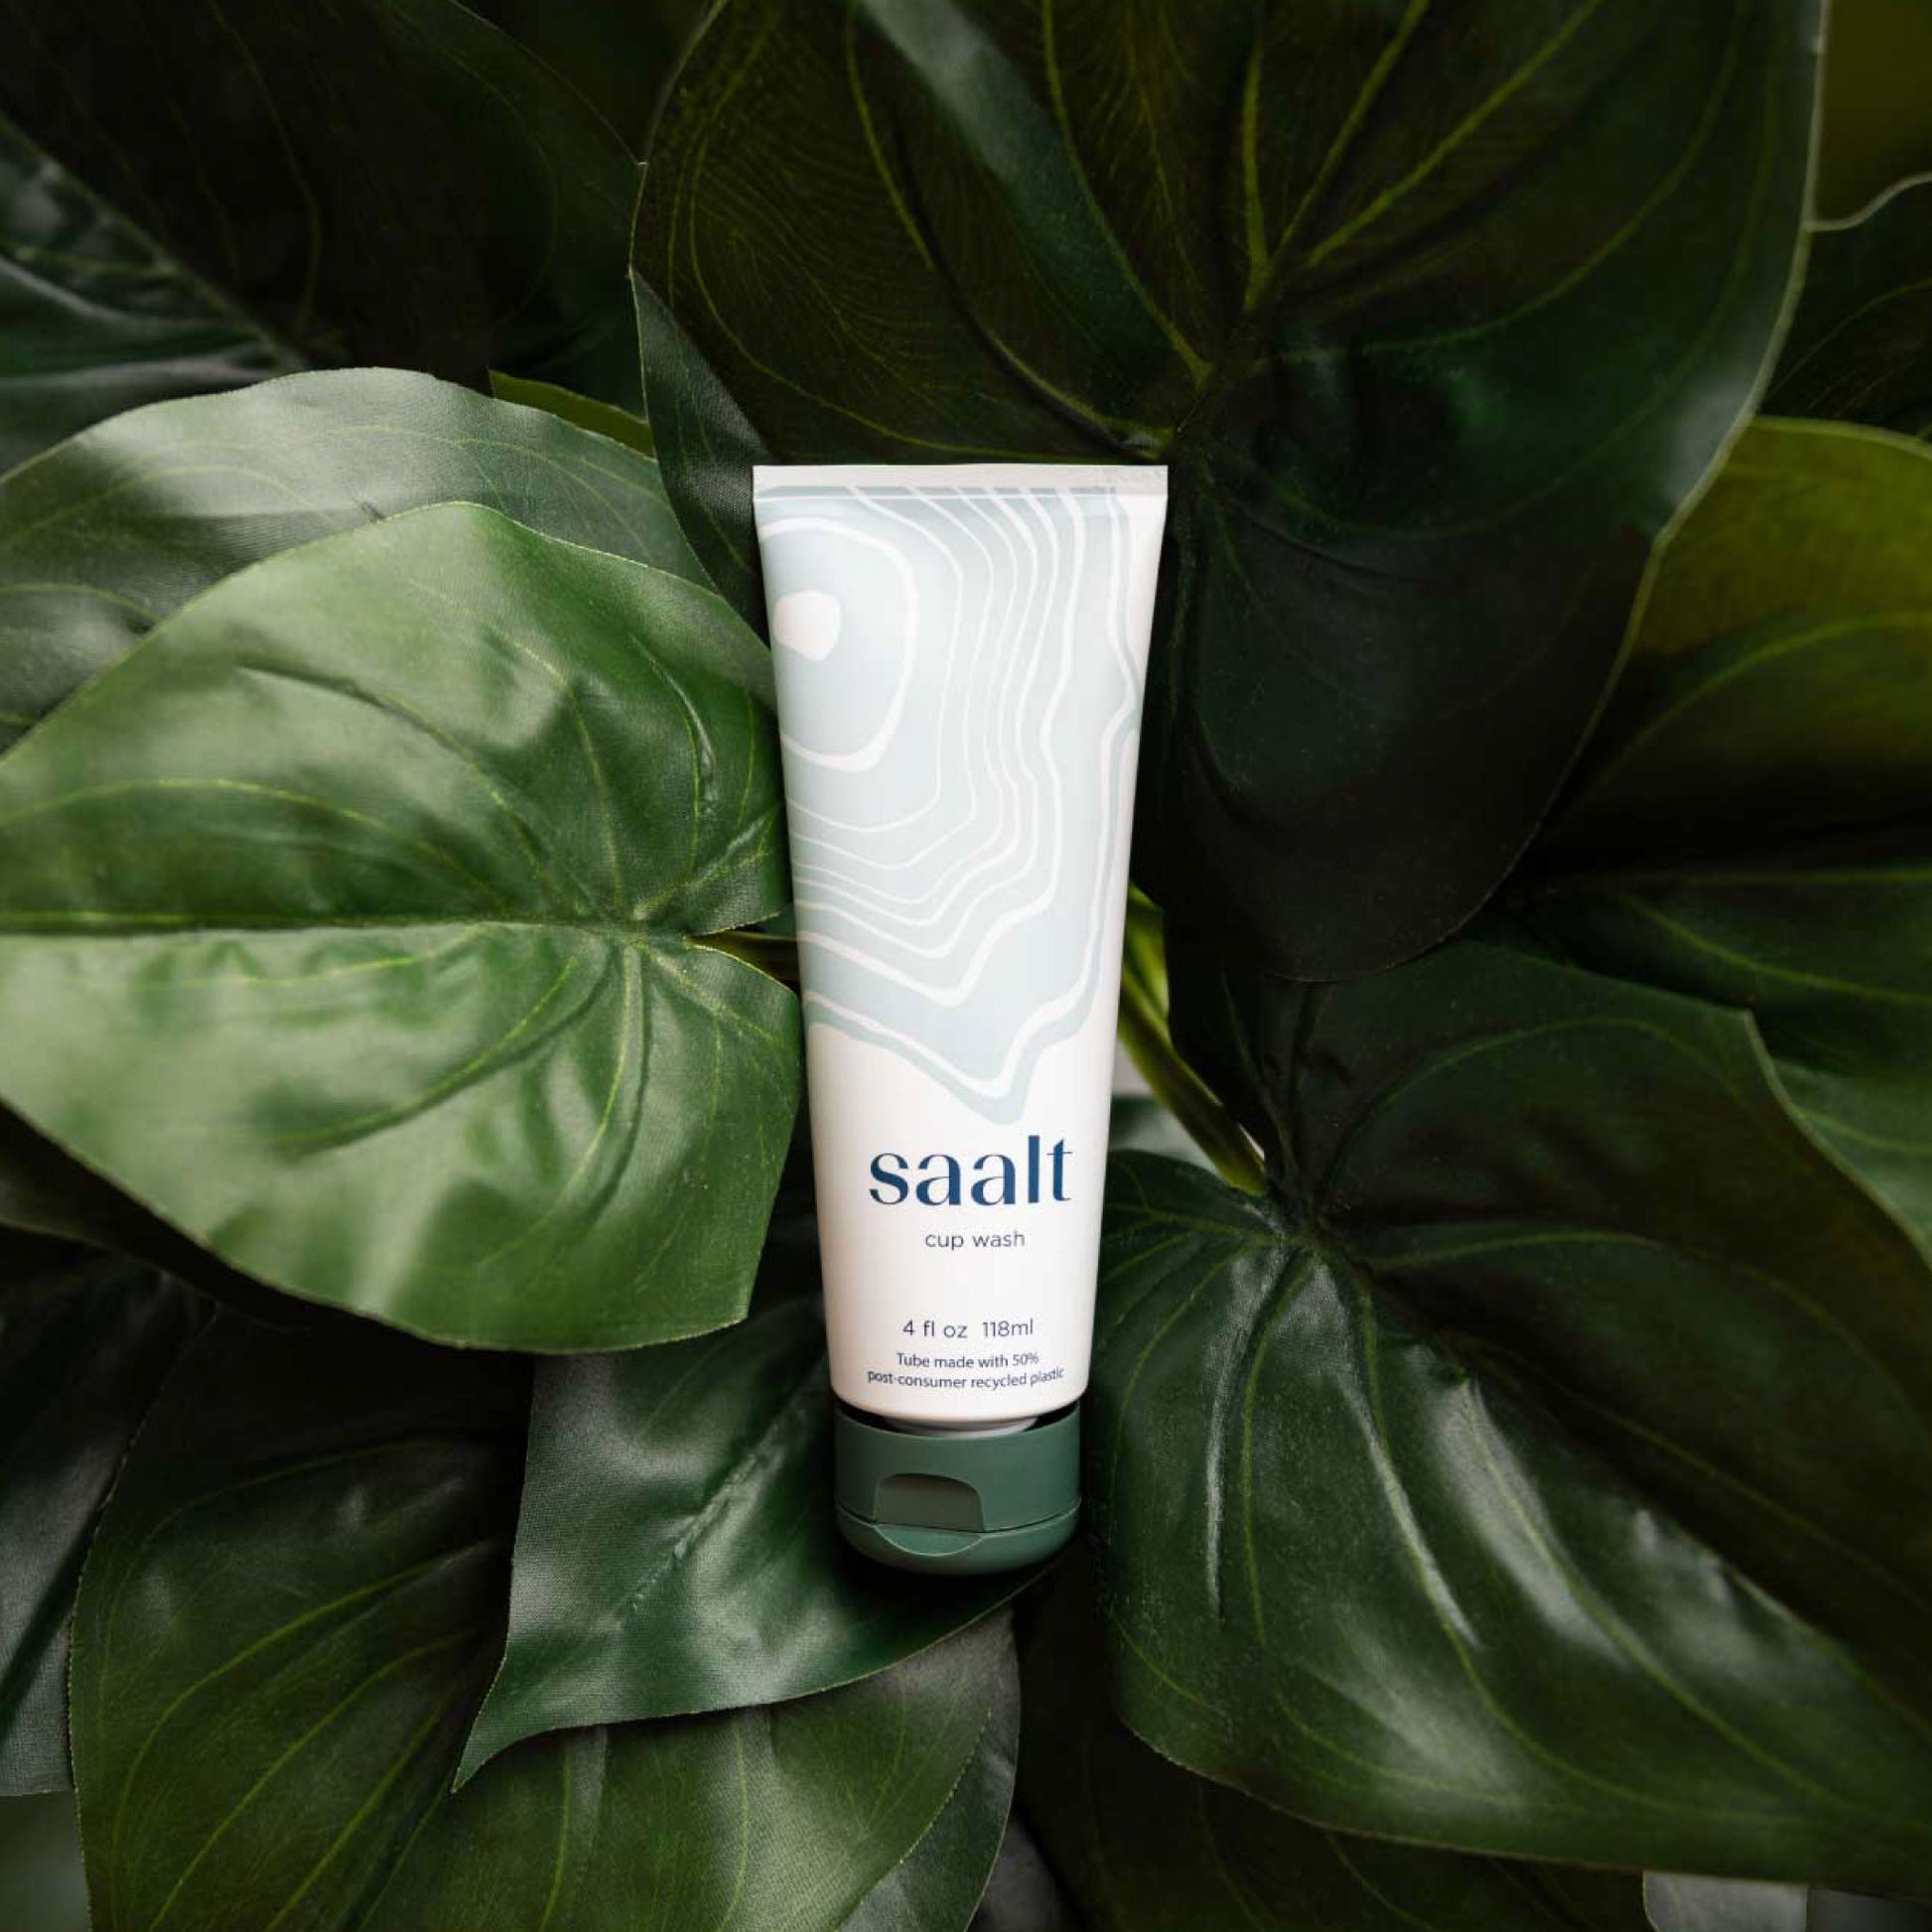 Saalt Tube made with post-consumer recycled plastic